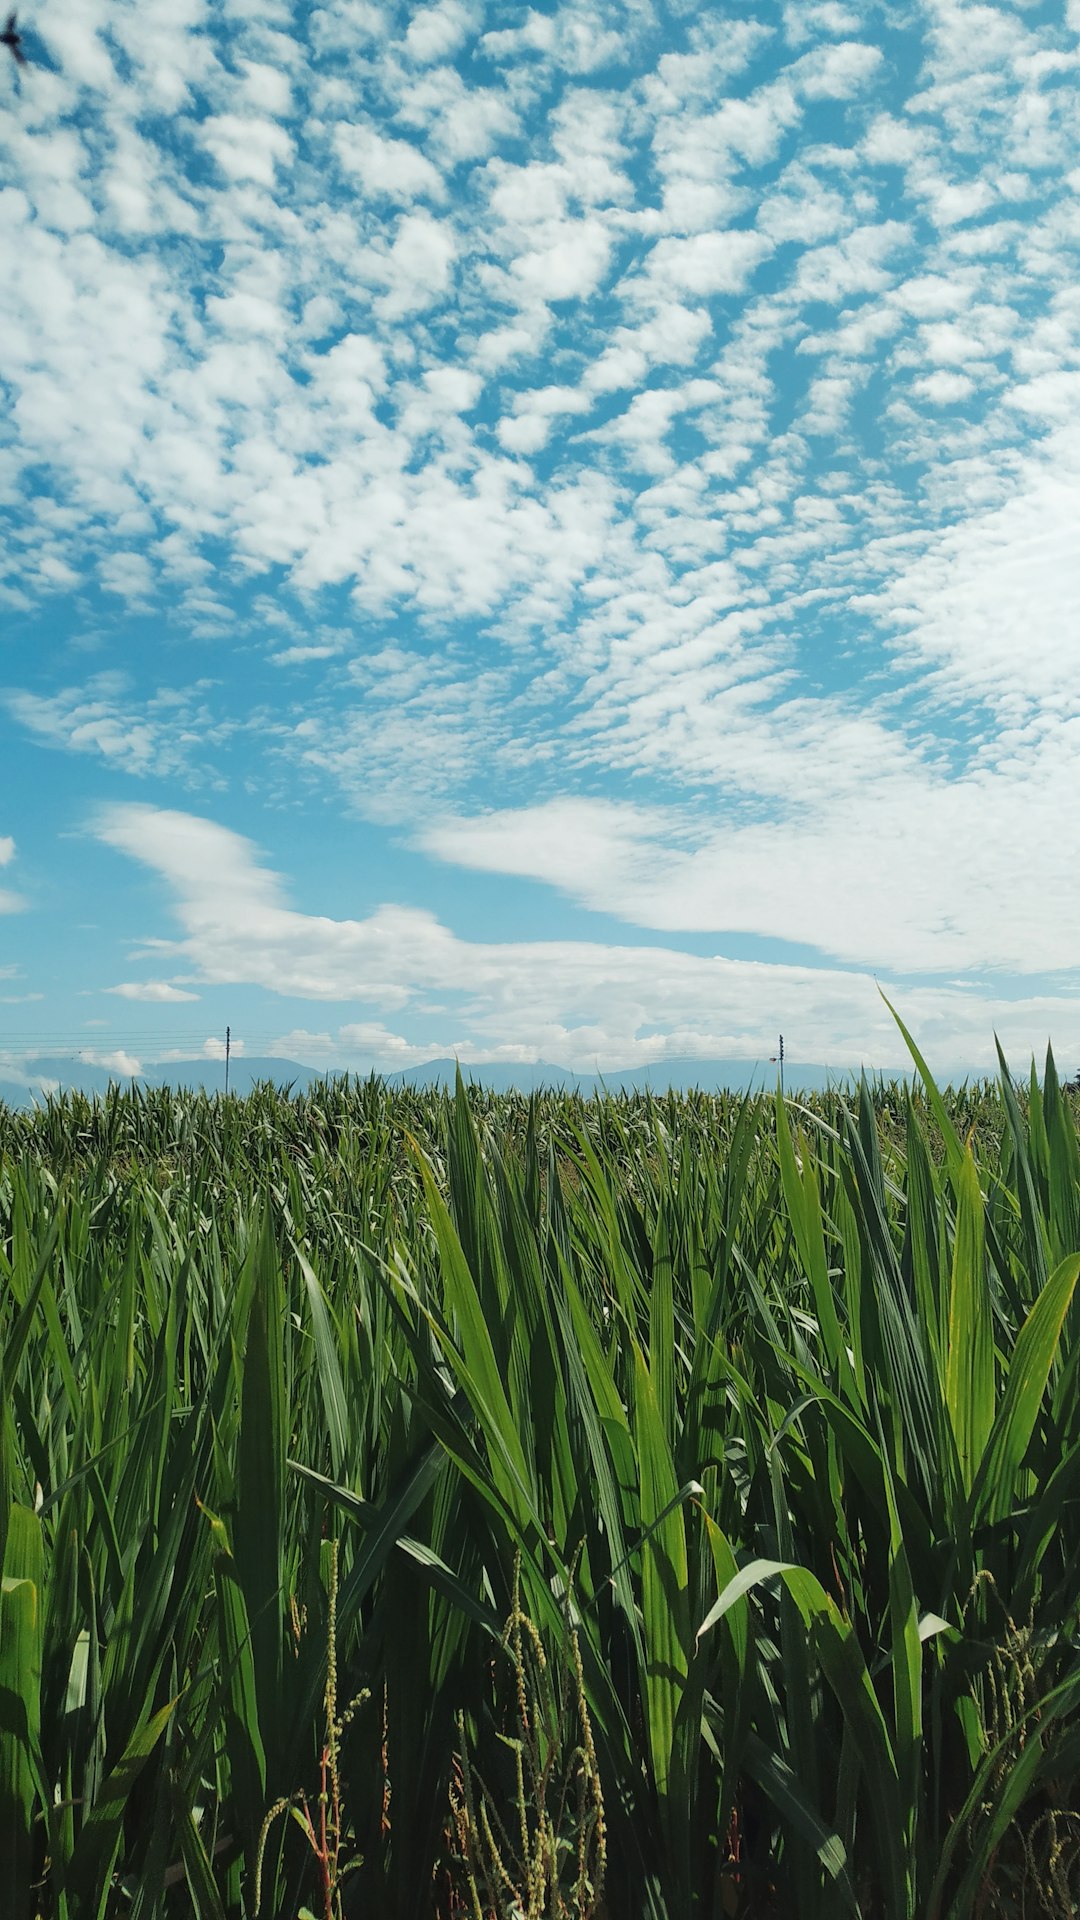 green corn field under blue and white skies during daytime